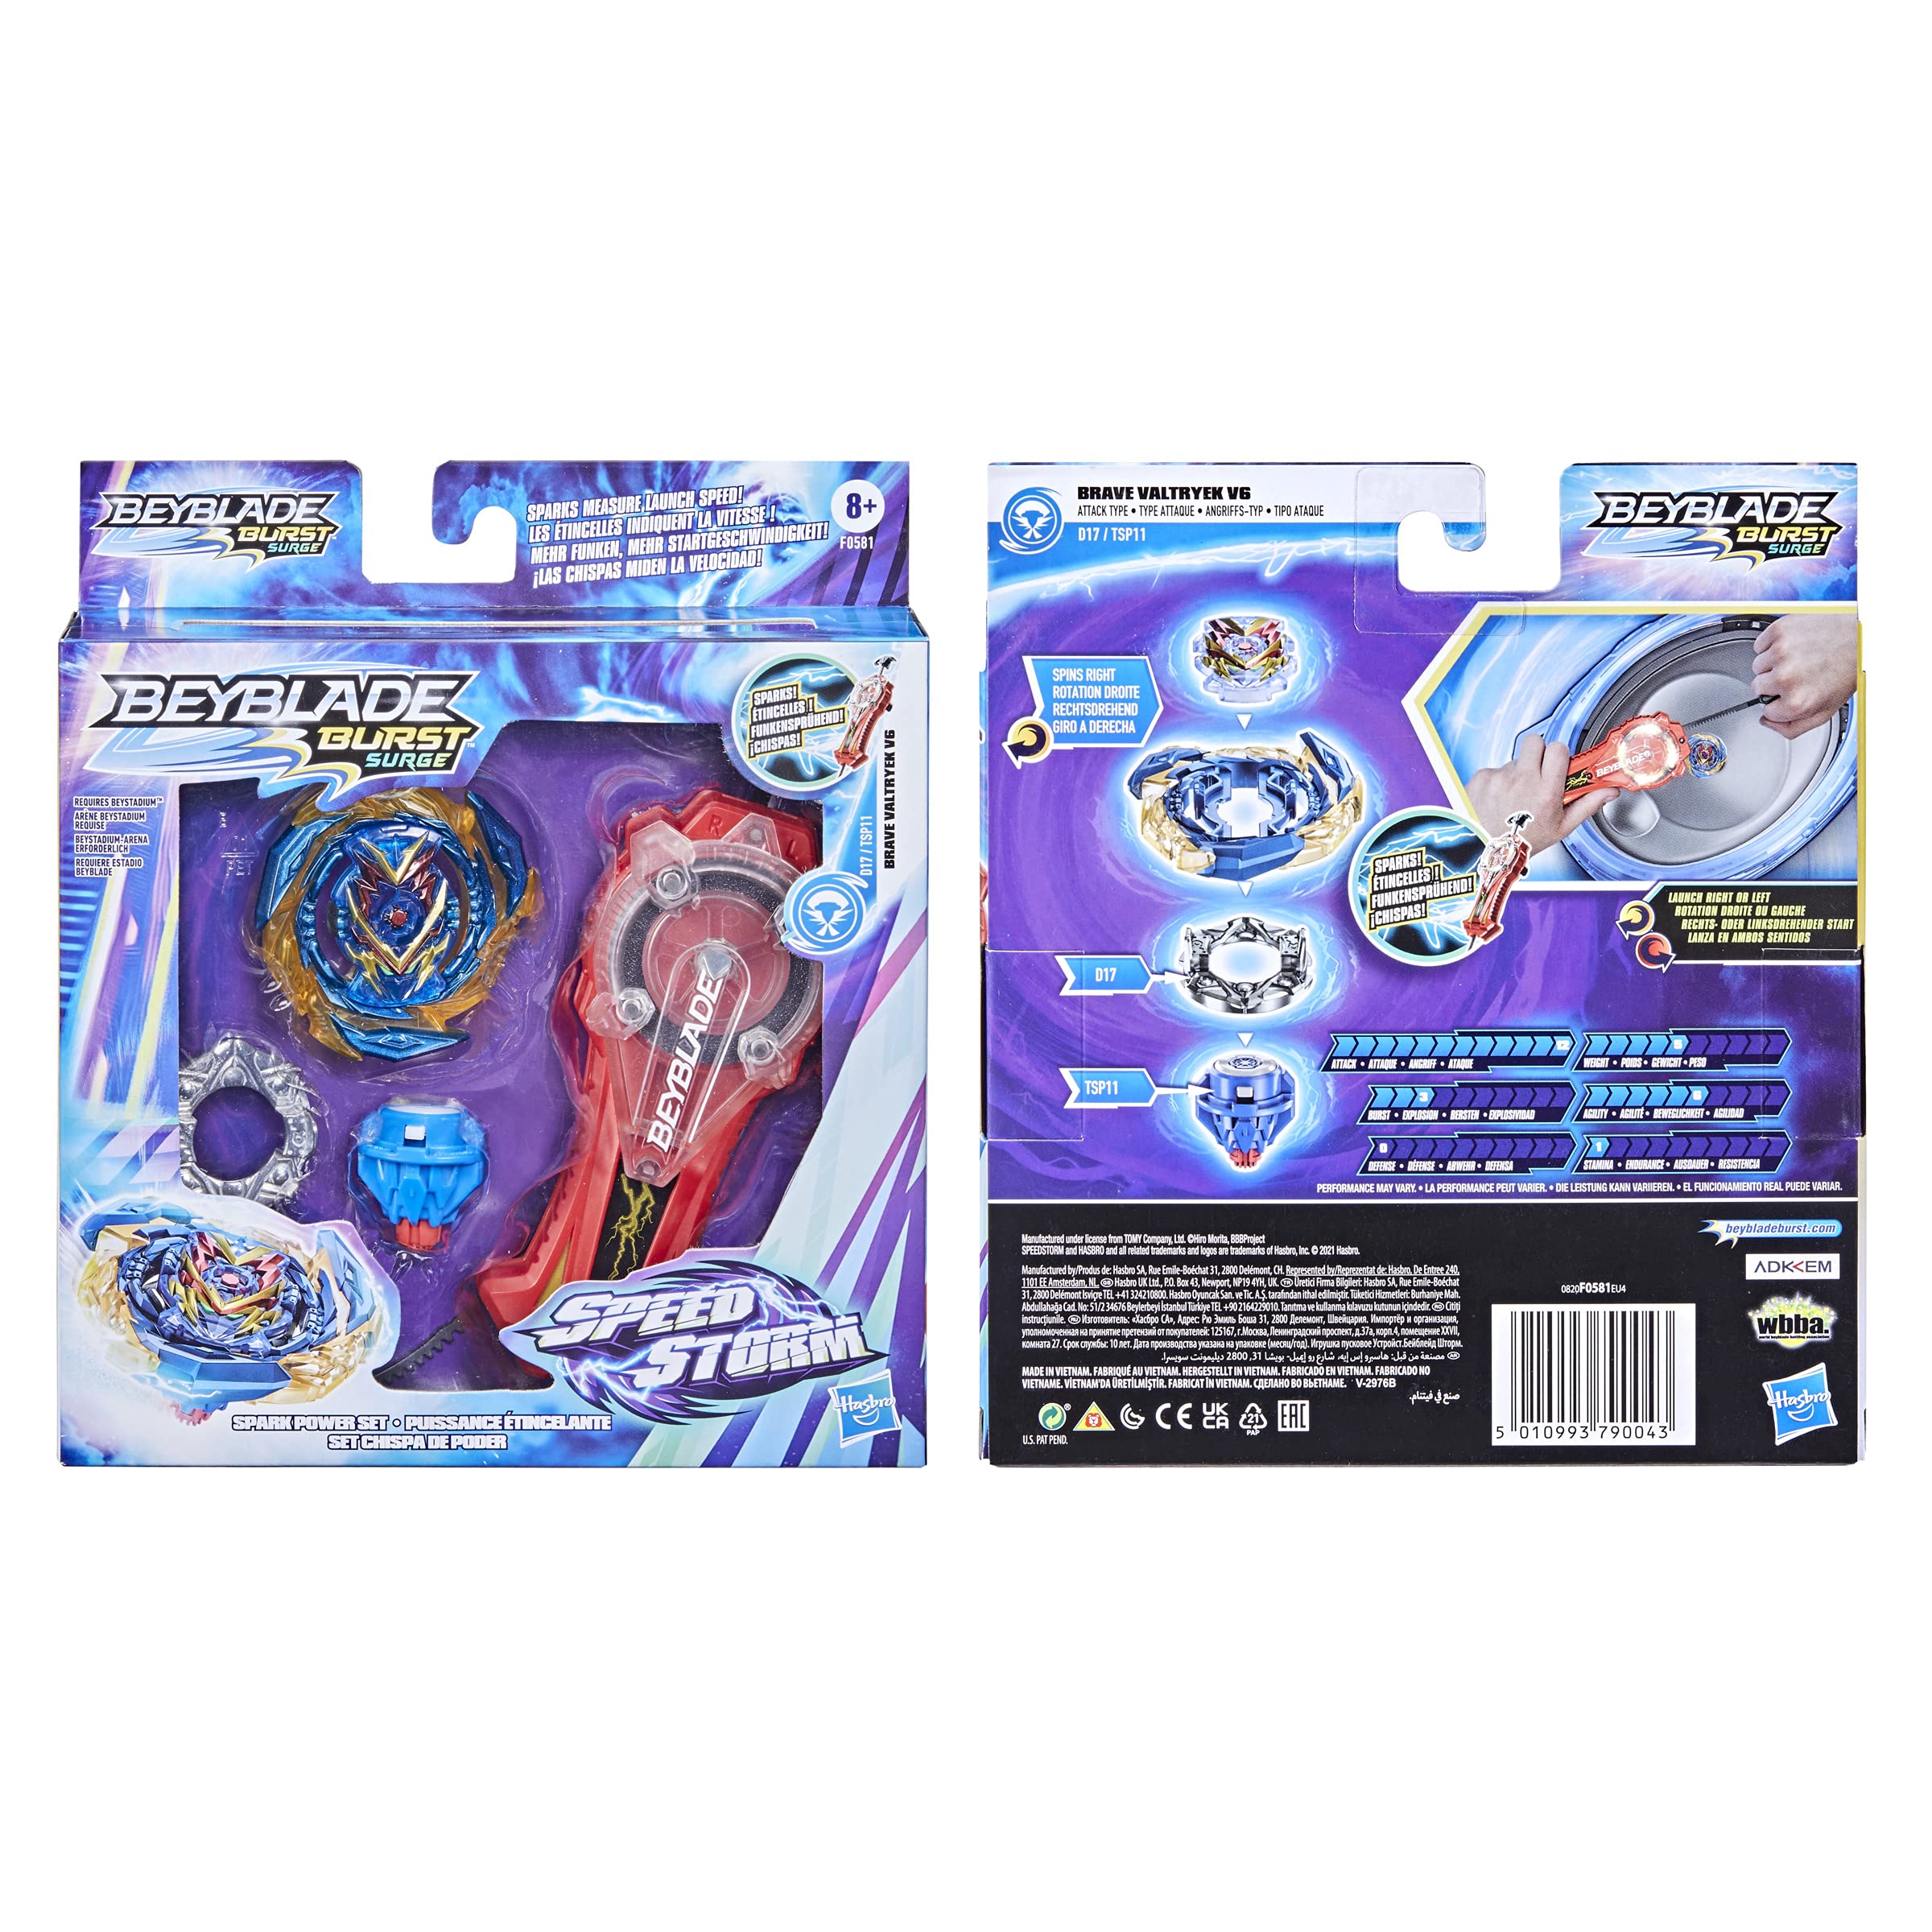 BEYBLADE Burst Surge Speedstorm Spark Power Set - Battle Game Set with Sparking Launcher and Right-Spin Battling Top Toy, Red